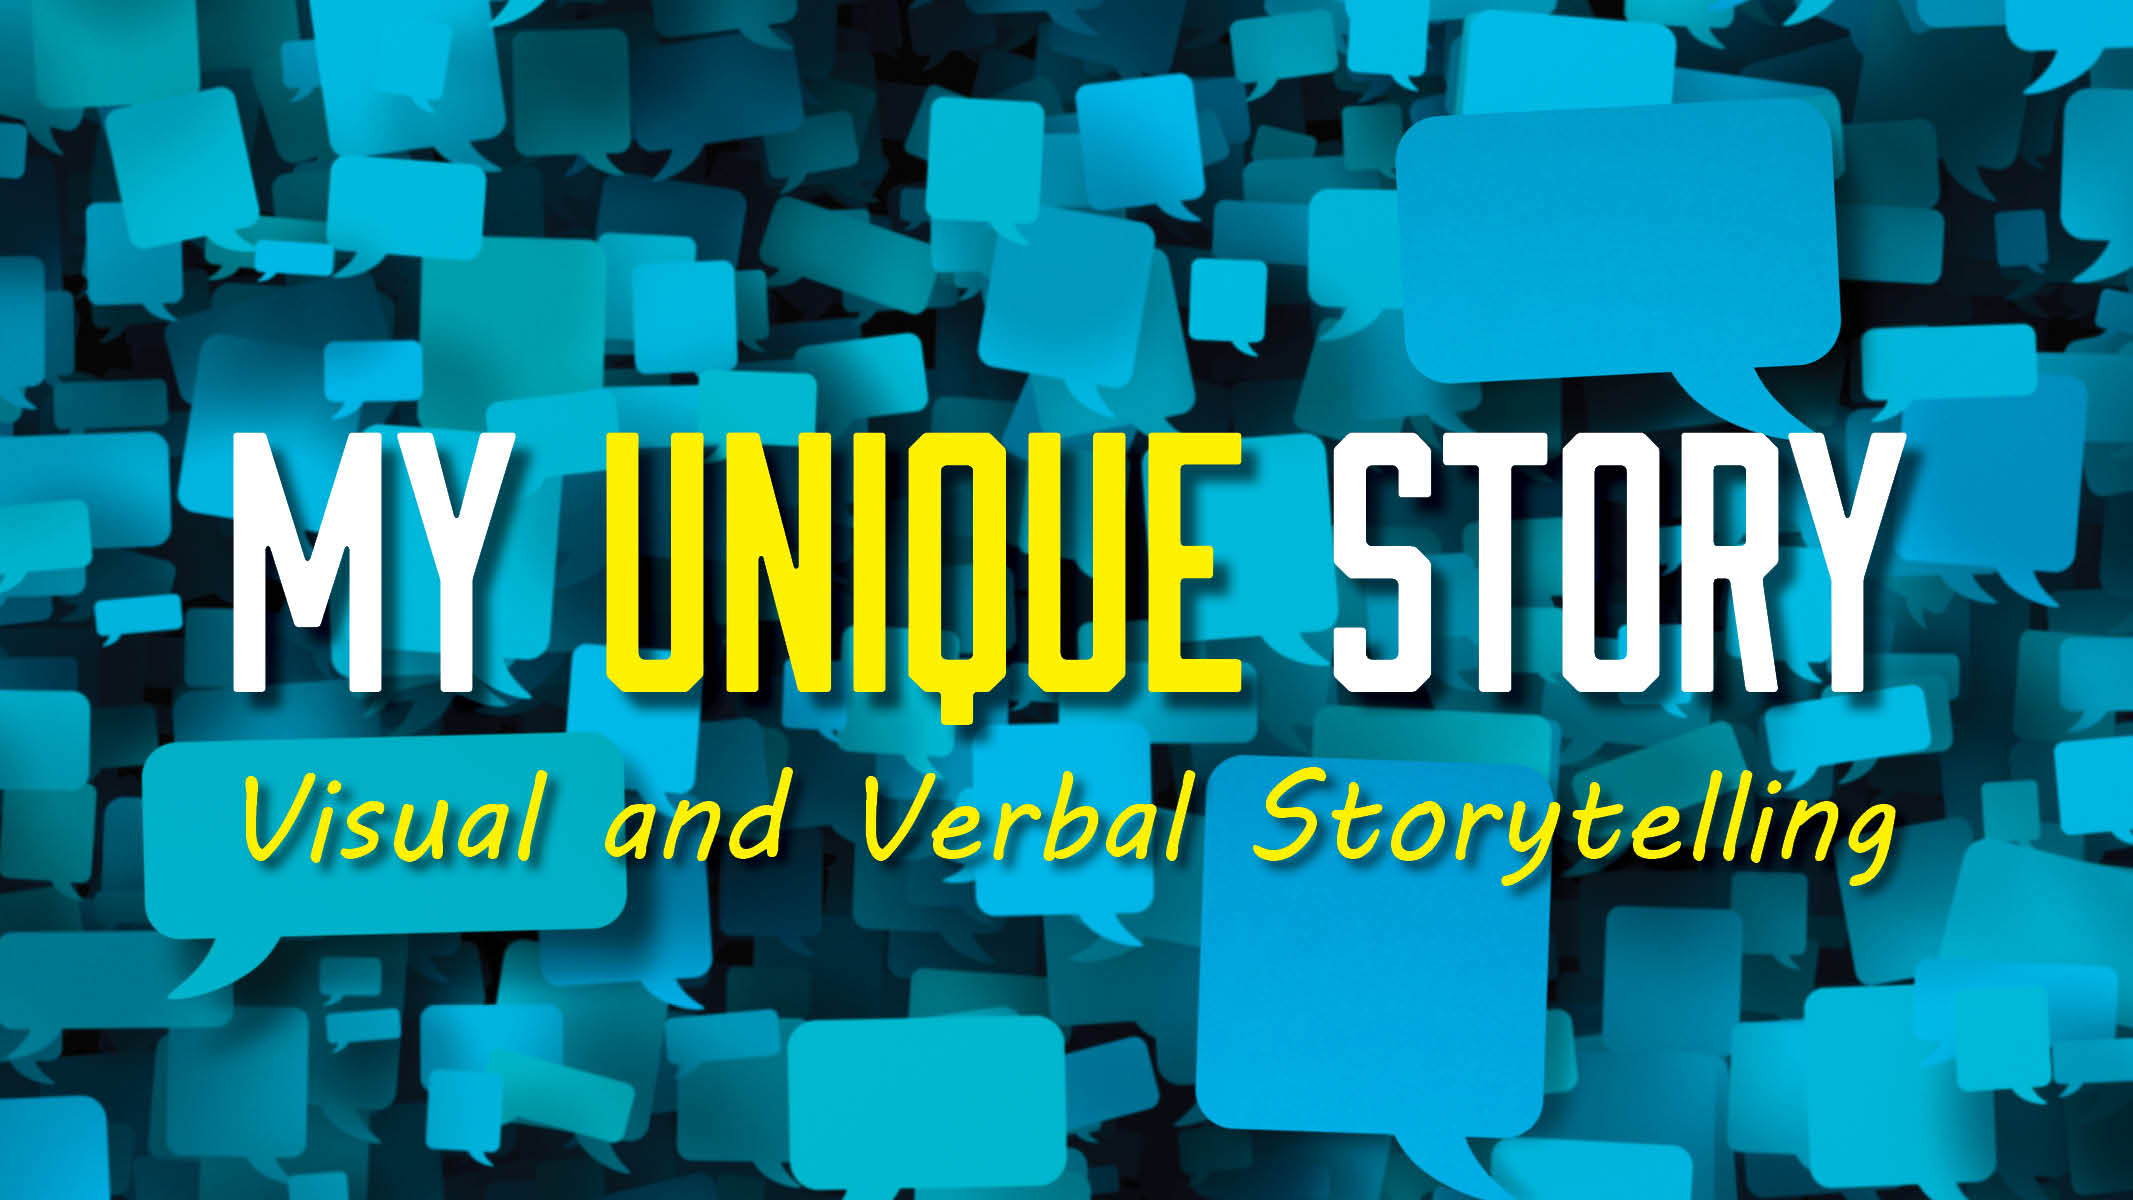 My Unique Story: Visual and Verbal Storytelling